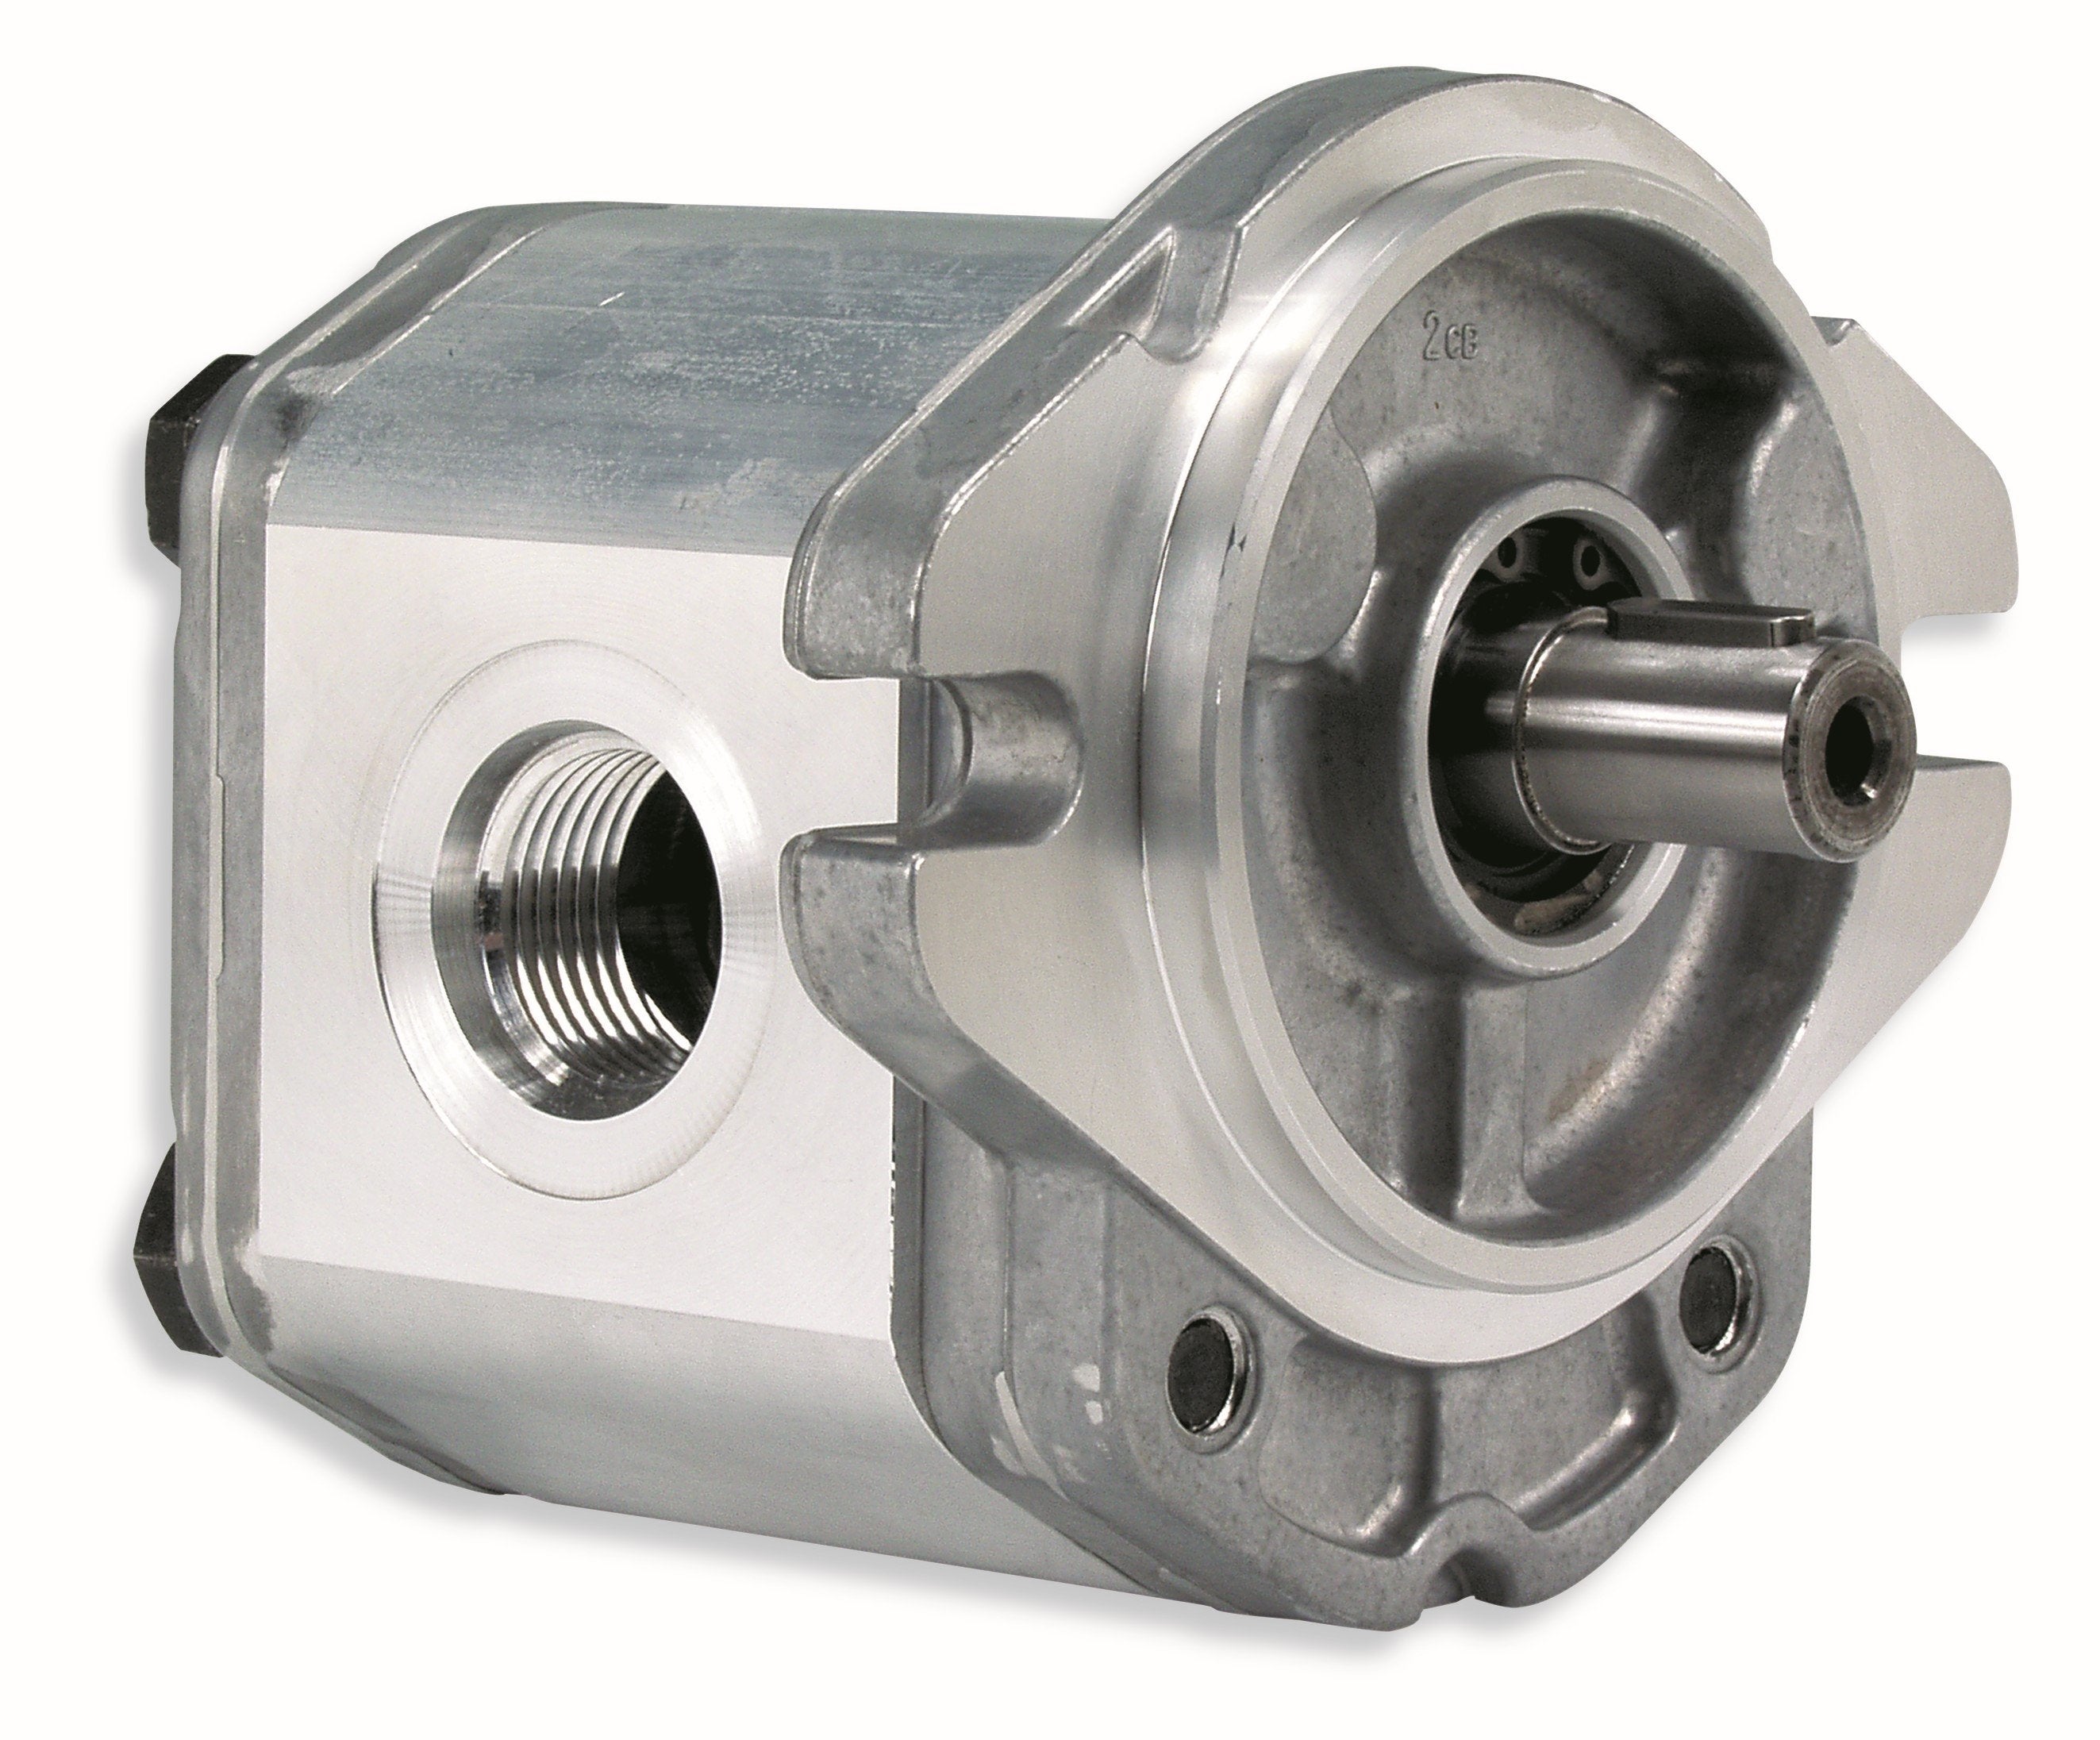 GHM1A-R-6-S1-E2 : Marzocchi Gear Motor, Bidirectional, 4.1cc, 3915psi rated, 4000RPM, 0.5 (1/2") #8 SAE ports, 9T 20/40DP Splined Shaft